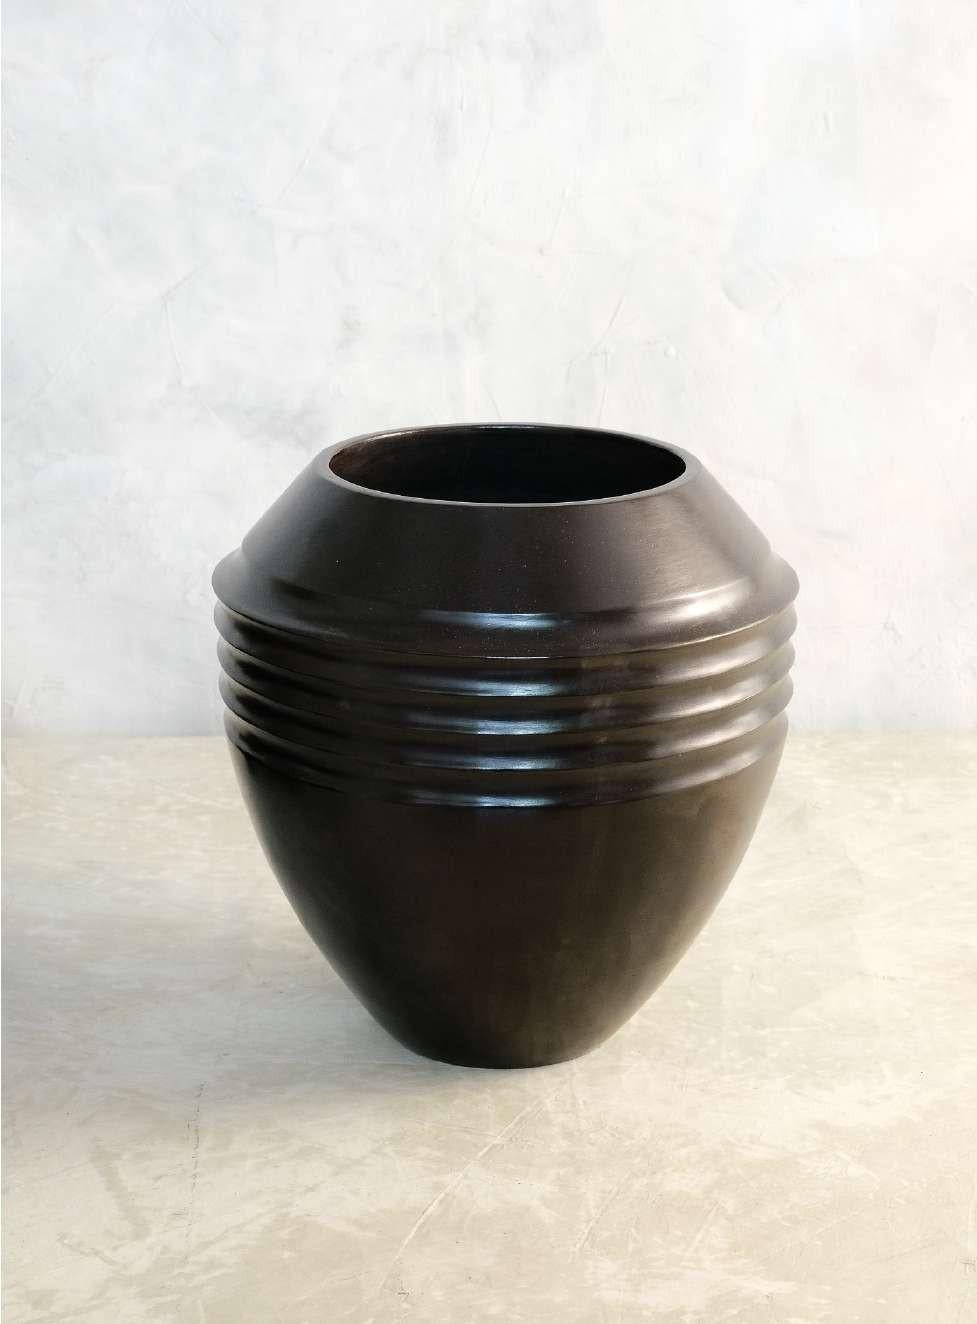 Pair of Cascabel vase by Onora
Dimensions: D 30 x H 28 cm
Materials: Clay

This collection reinterprets one of the oldest structural techniques in pottery, coiling, the vessels made with this technique are made from coils of clay positioned in